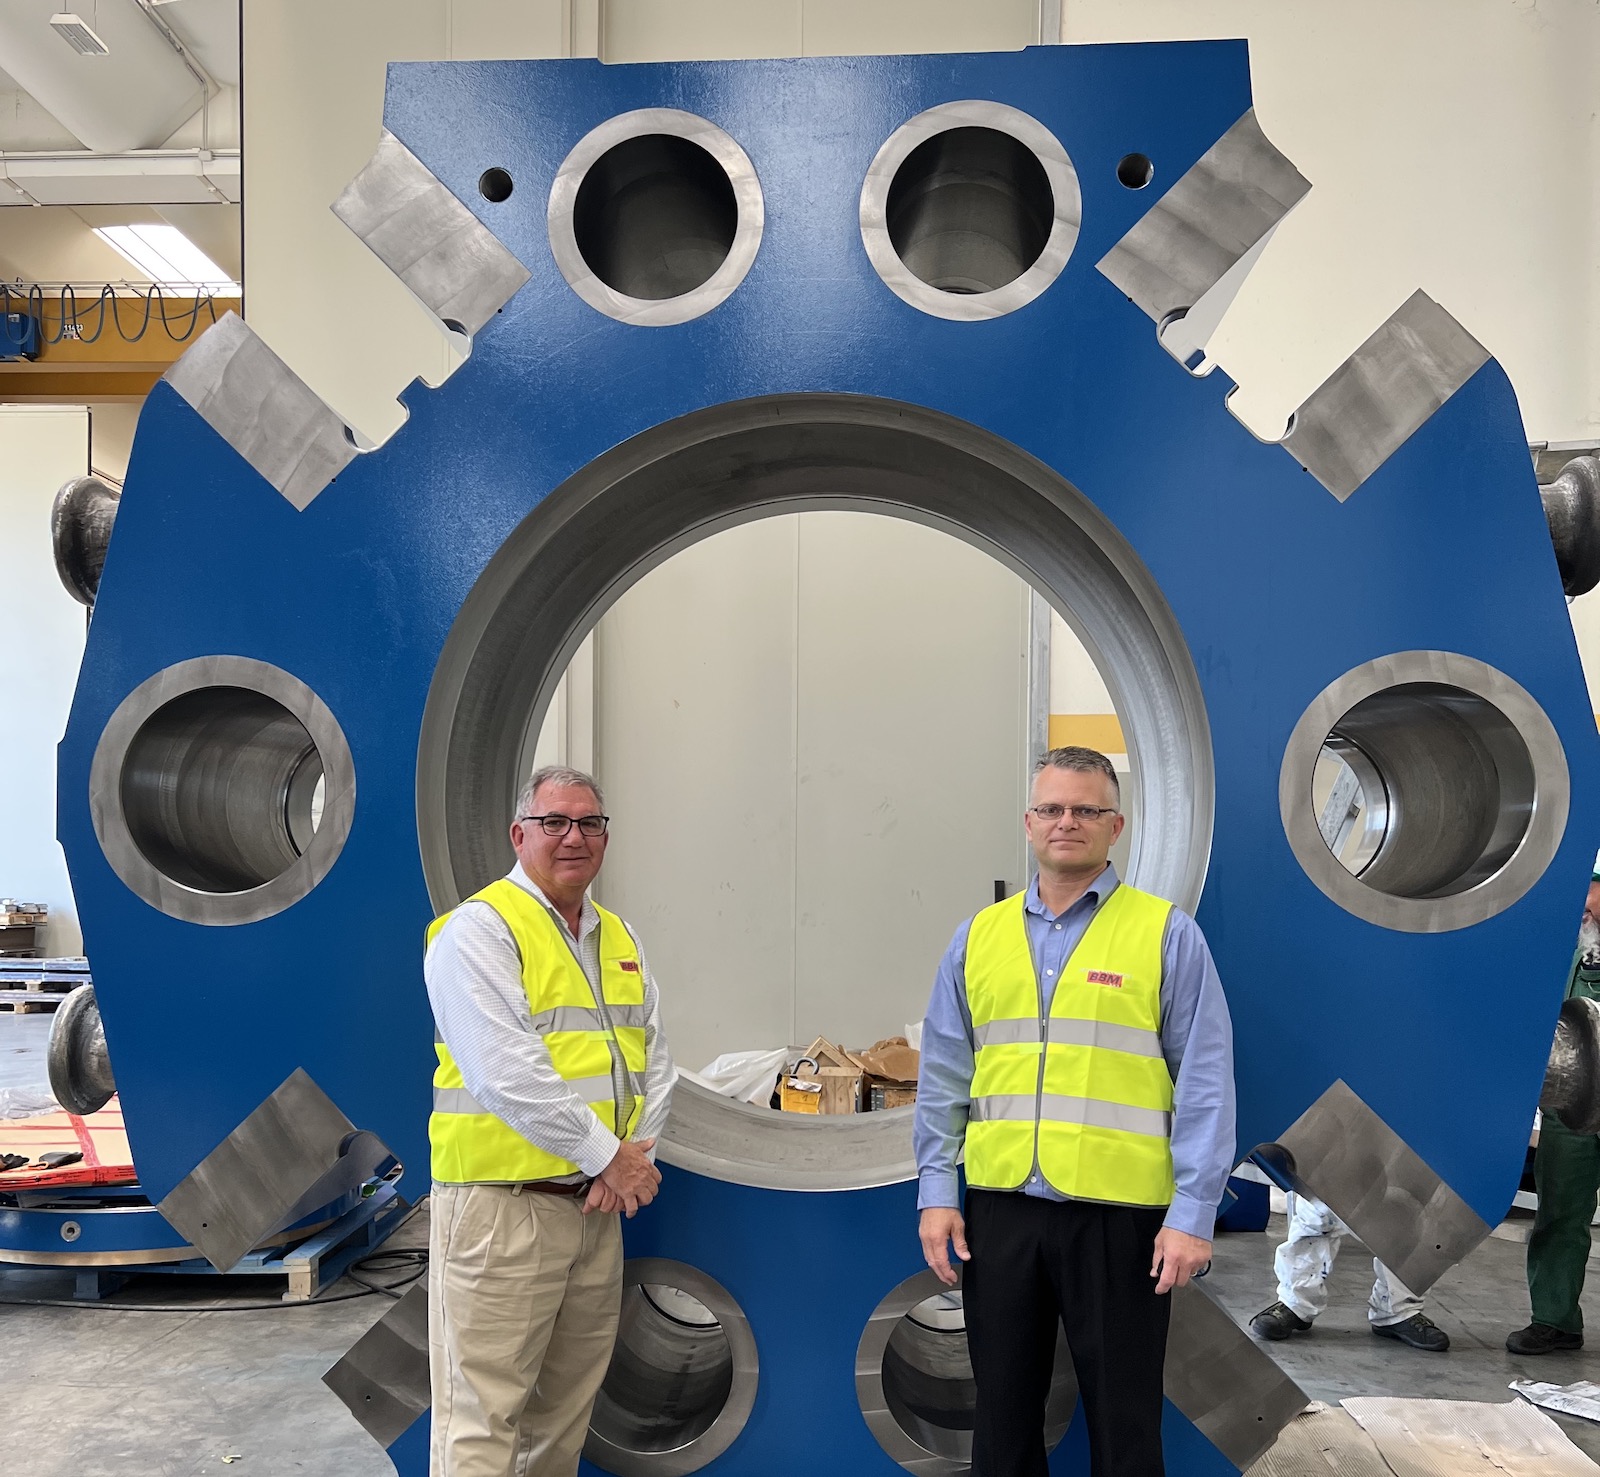 Figure 1. L-R: Nick Kohn, owner of Belco Industries, and Charlie Hall, president of EAC, visit the new press while under construction at OMAV’s plant in Italy.